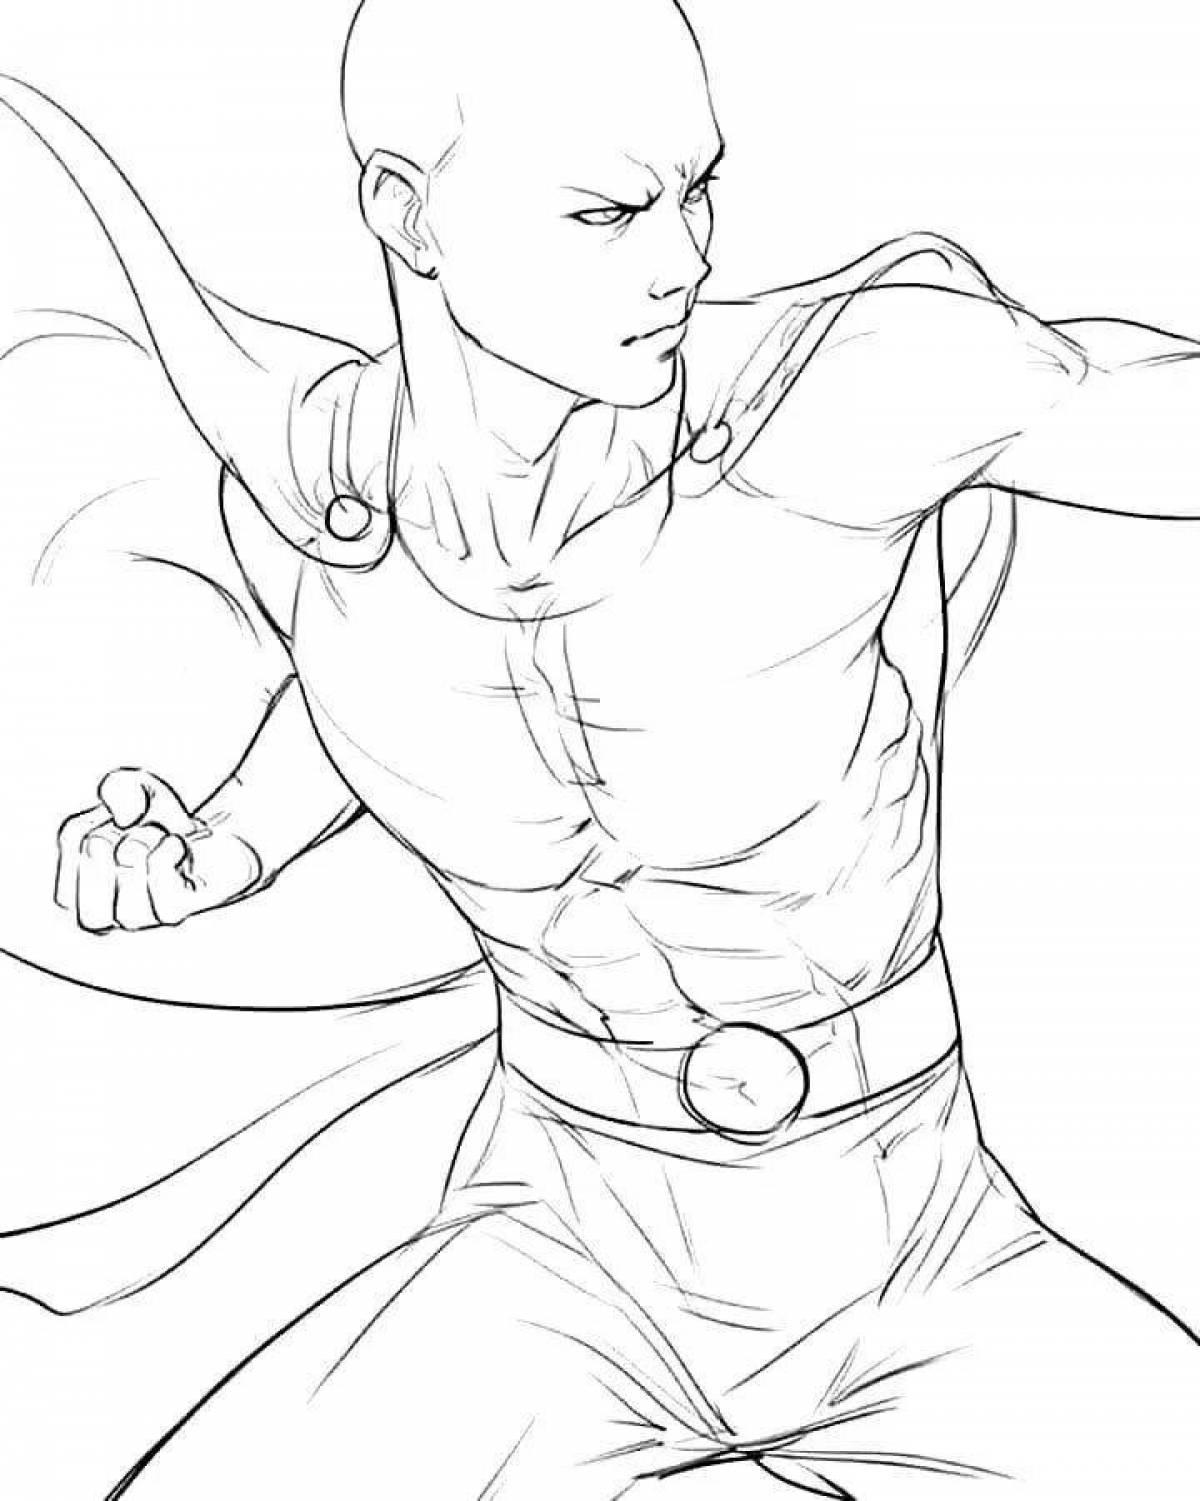 One Punch Man comic coloring book